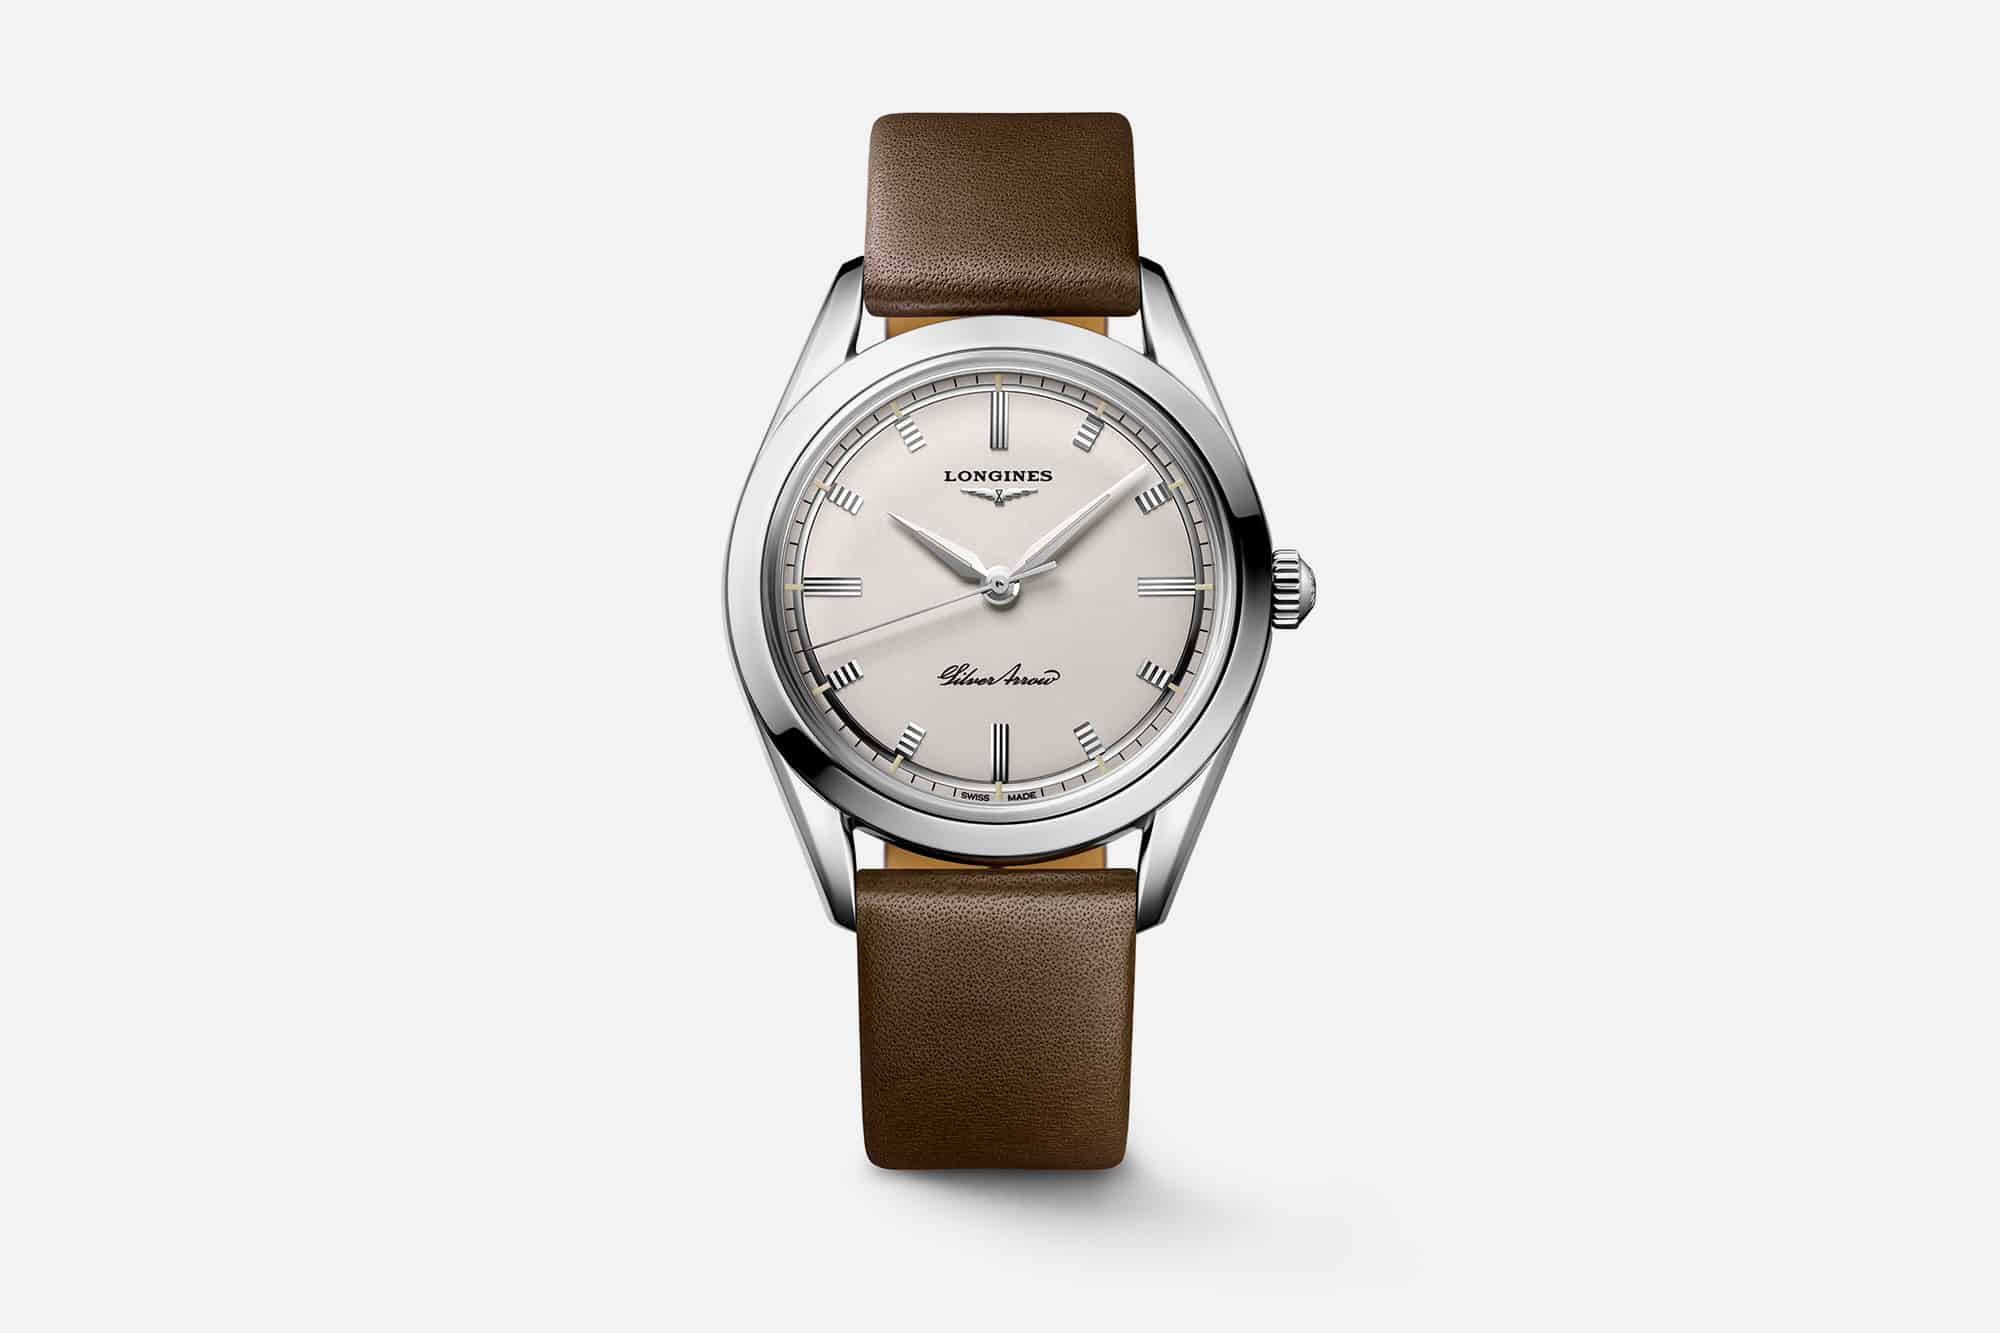 Introducing the Longines Silver Arrow